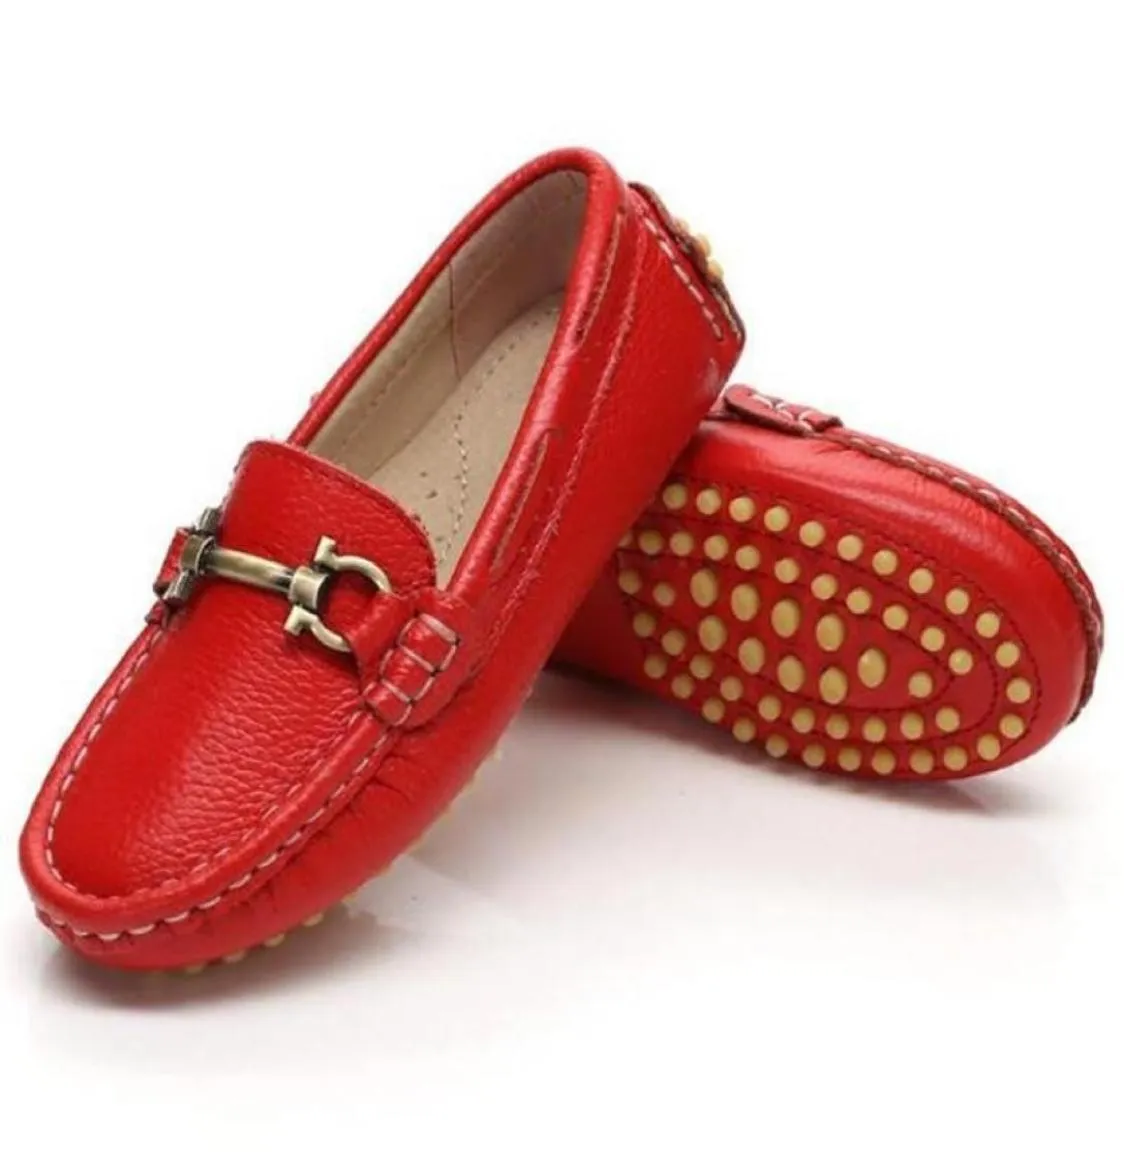 New Spring Dress Shoes Comfortable Baby Toddler Casual Loafers Slip-On Genuine Leather Boys Girls Kids Flat Shoes5996070